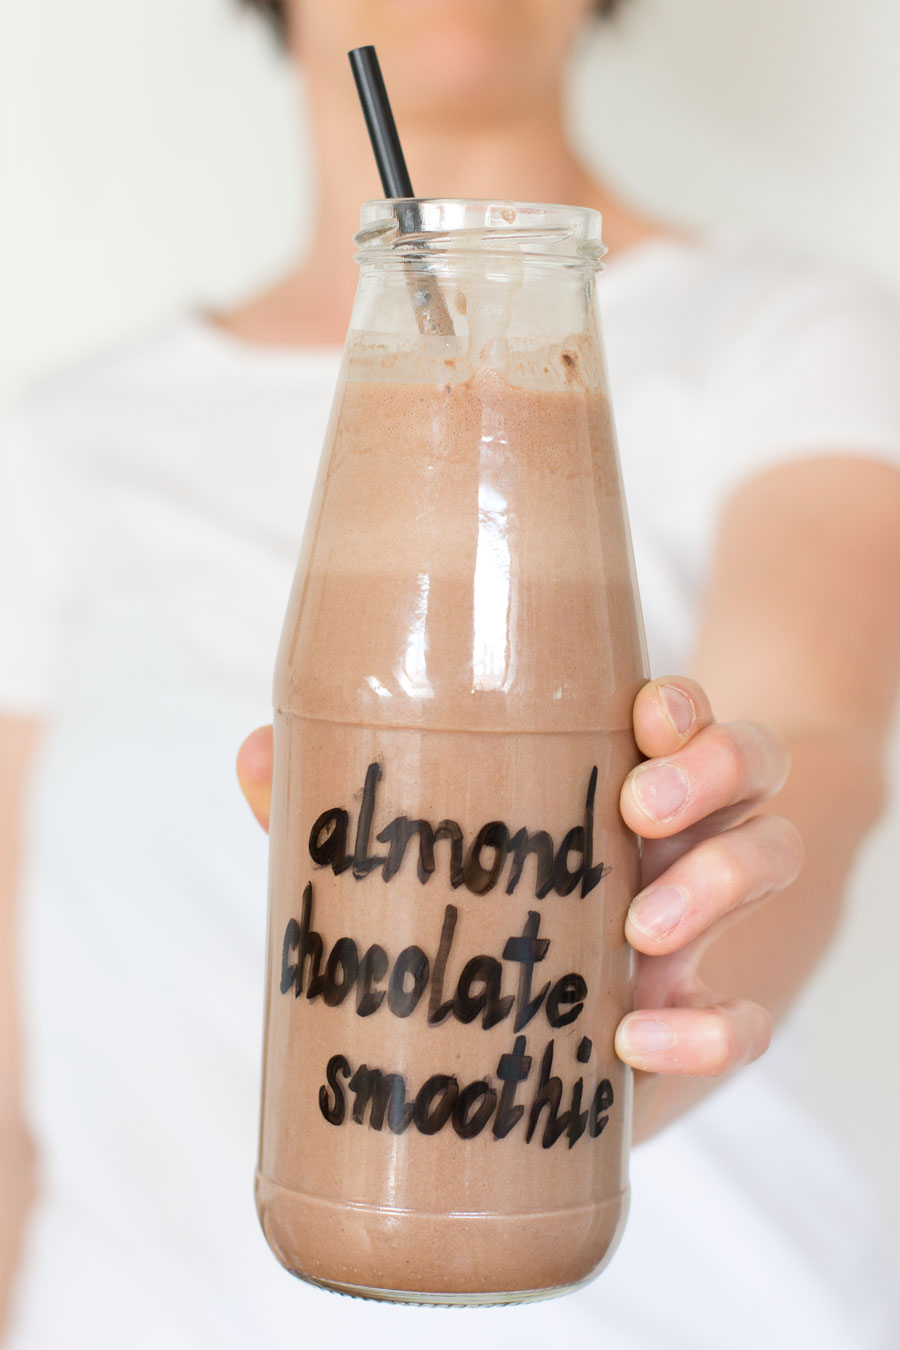 A healthy smoothie recipe that tastes like a delicious dessert to drink: 3 ingredients almond chocolate smoothie!